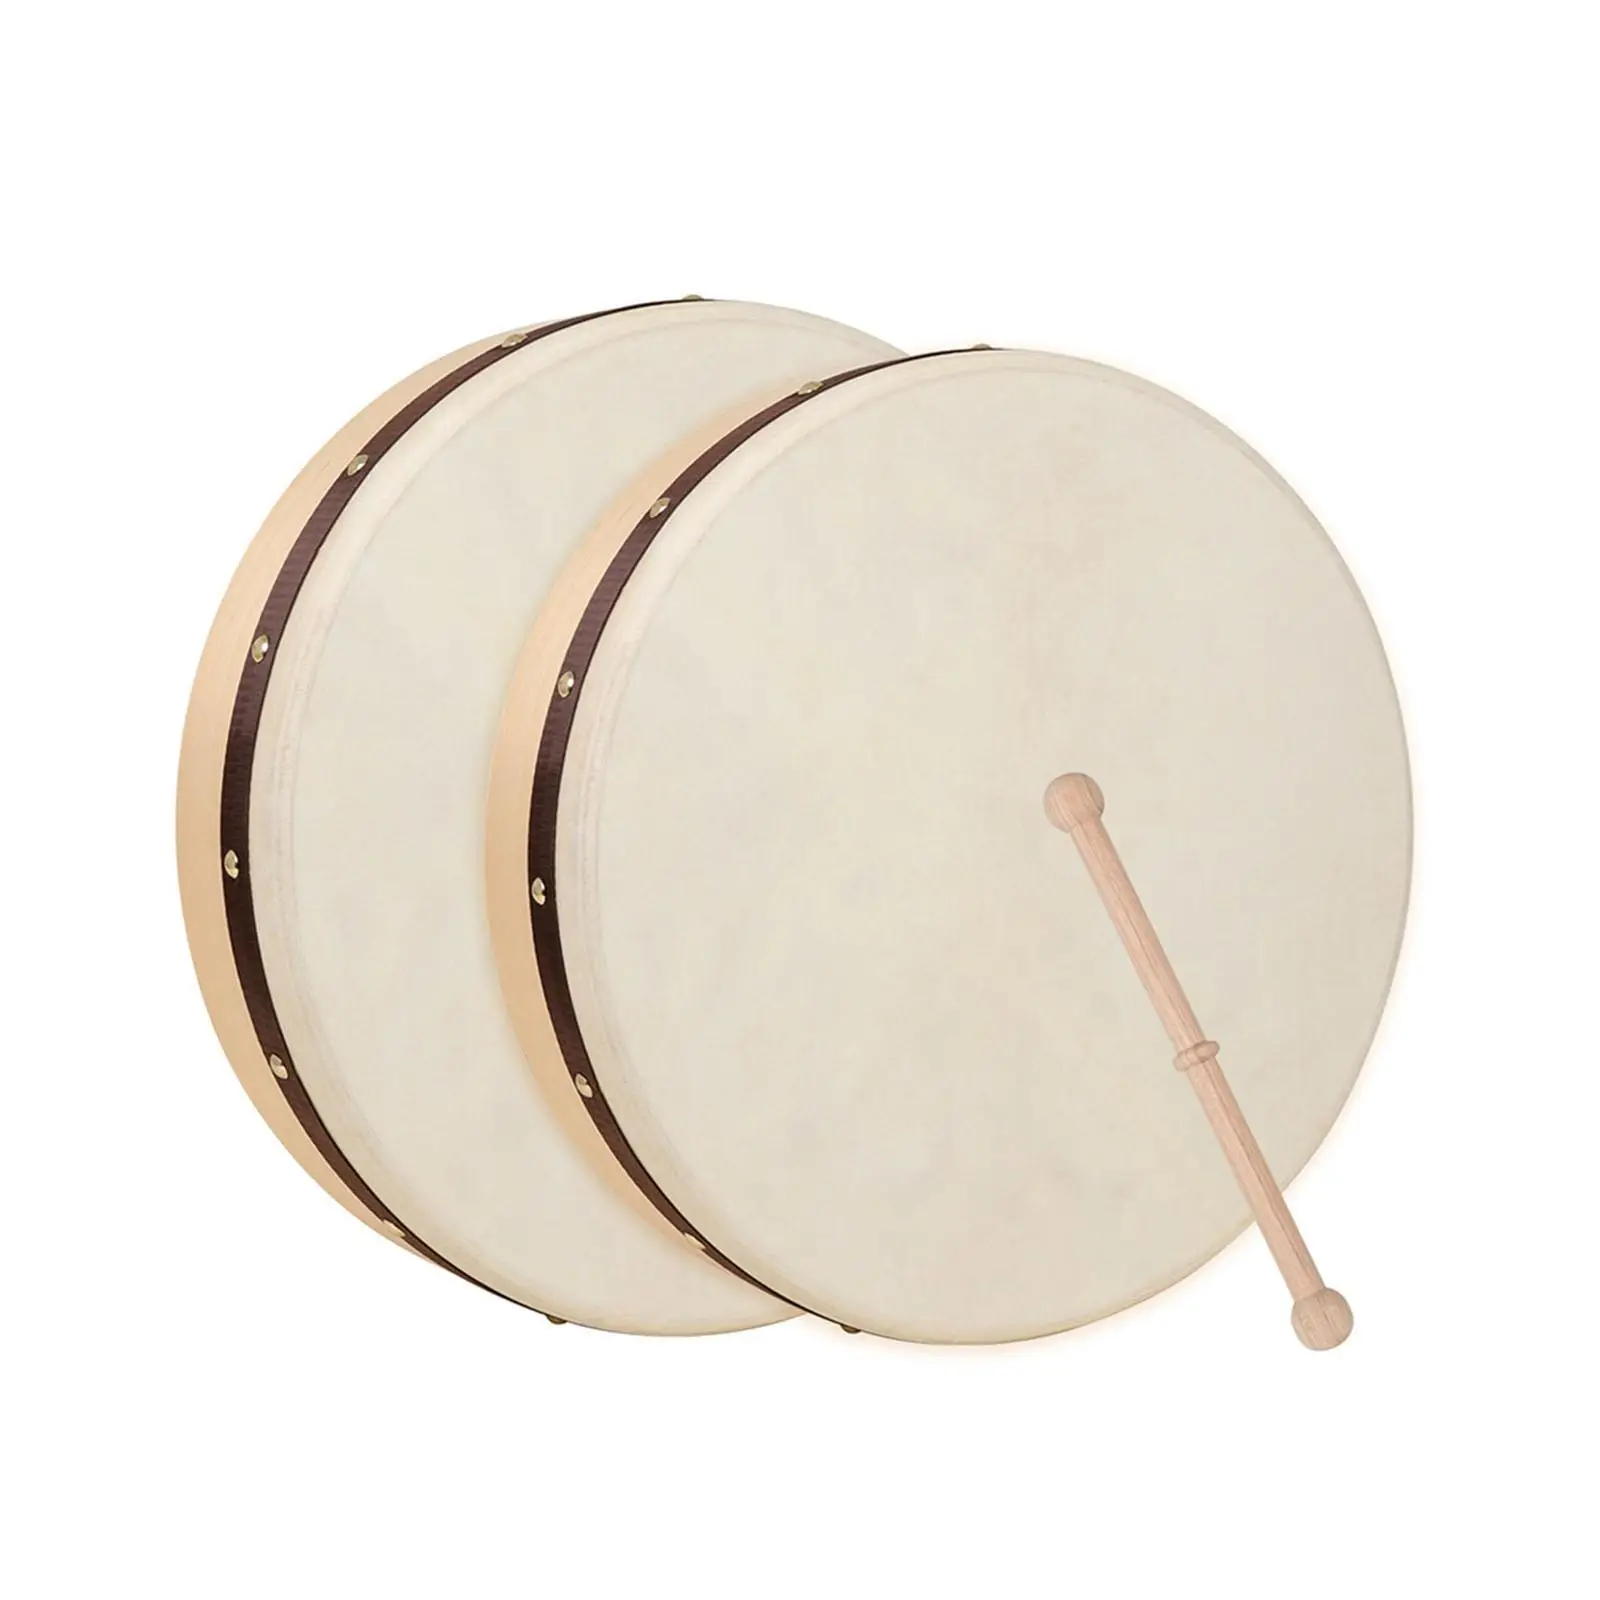 Wooden Hand Drum Tambourine Kids Percussion Toy Wood Frame Drum for Children Music Game Convenient to Carry Around